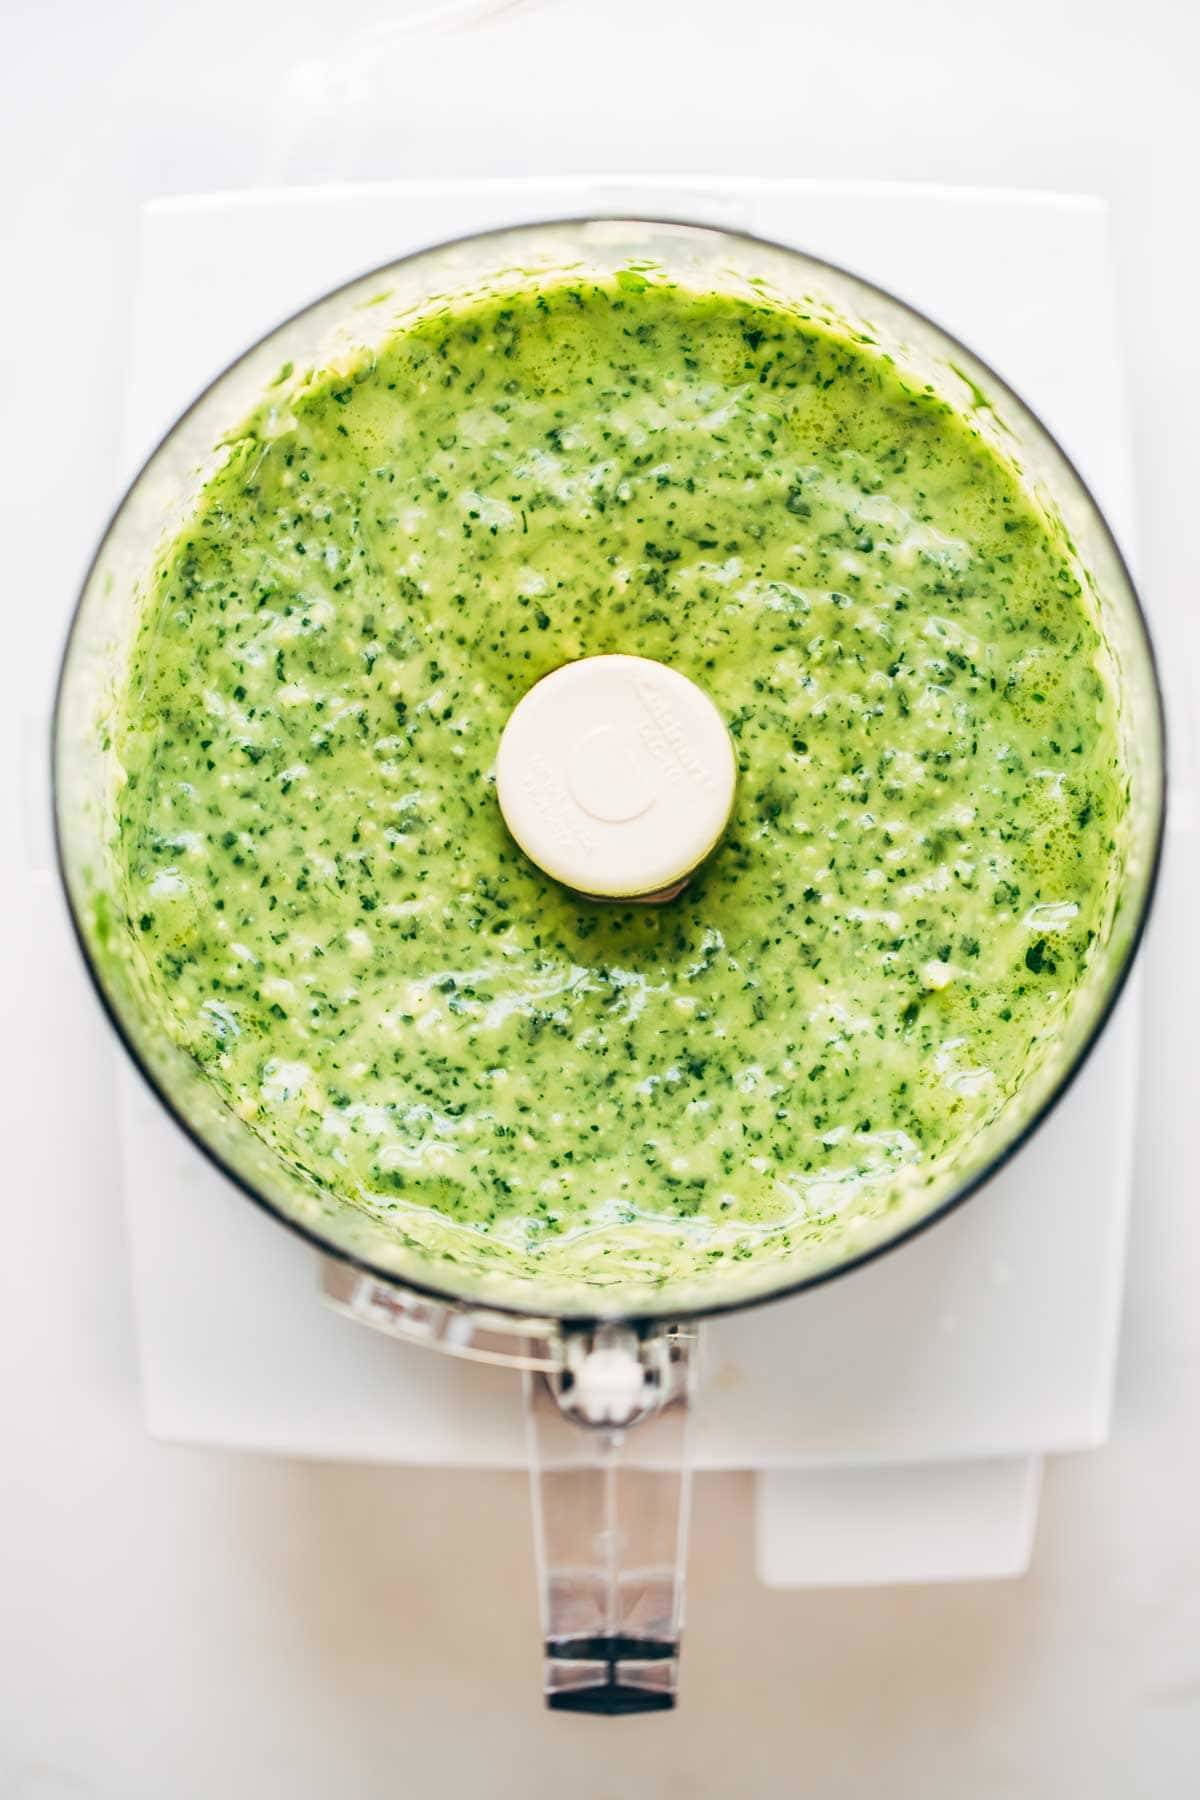 Blended Magic Green Sauce in a food processor. 